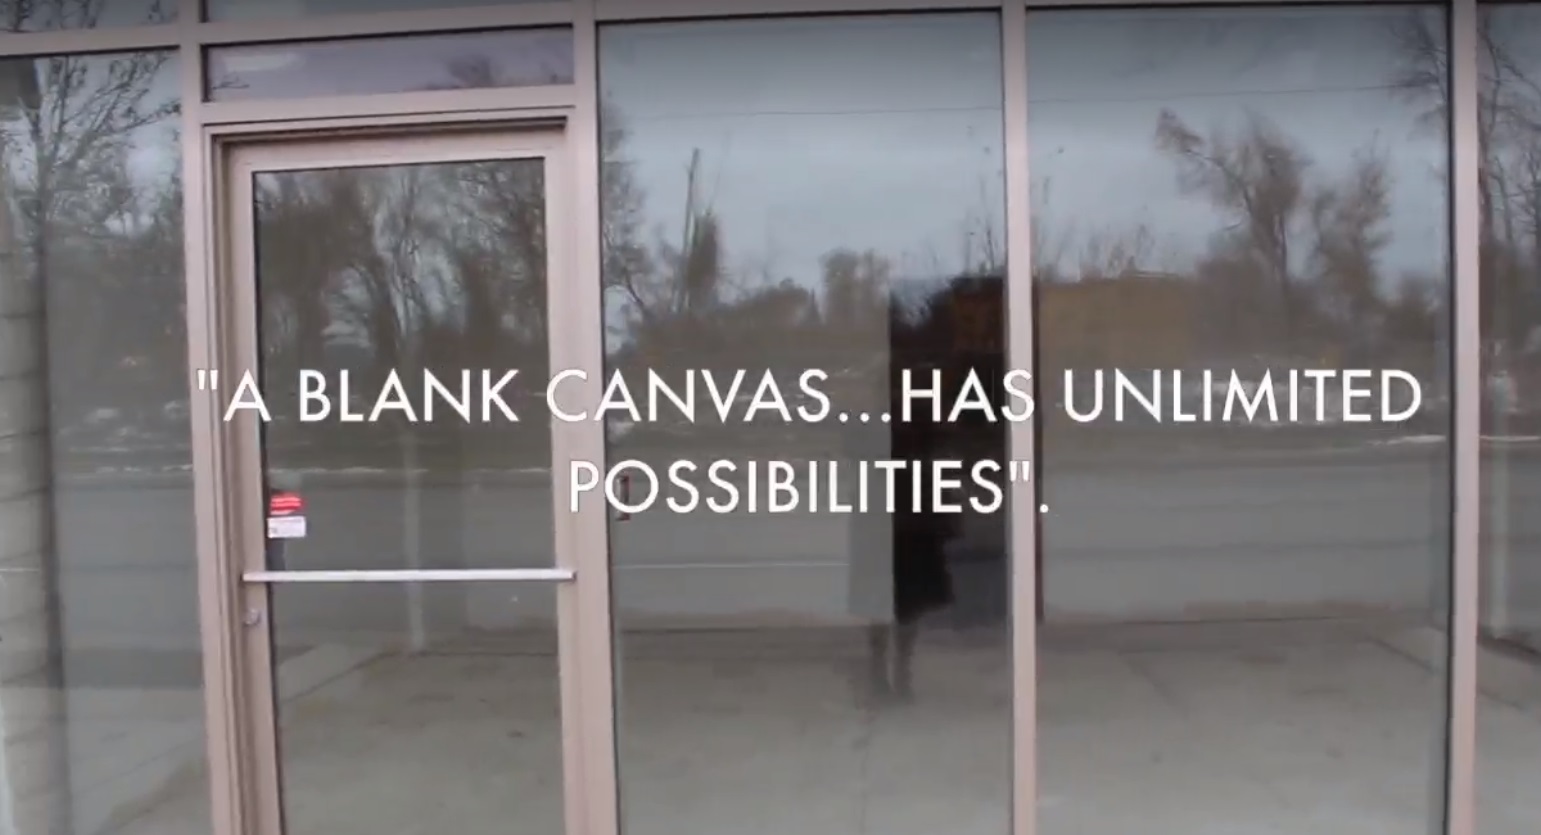 Photo of large glass windows and door. Text overlay reads "A blank canvas... has unlimited possibilities".